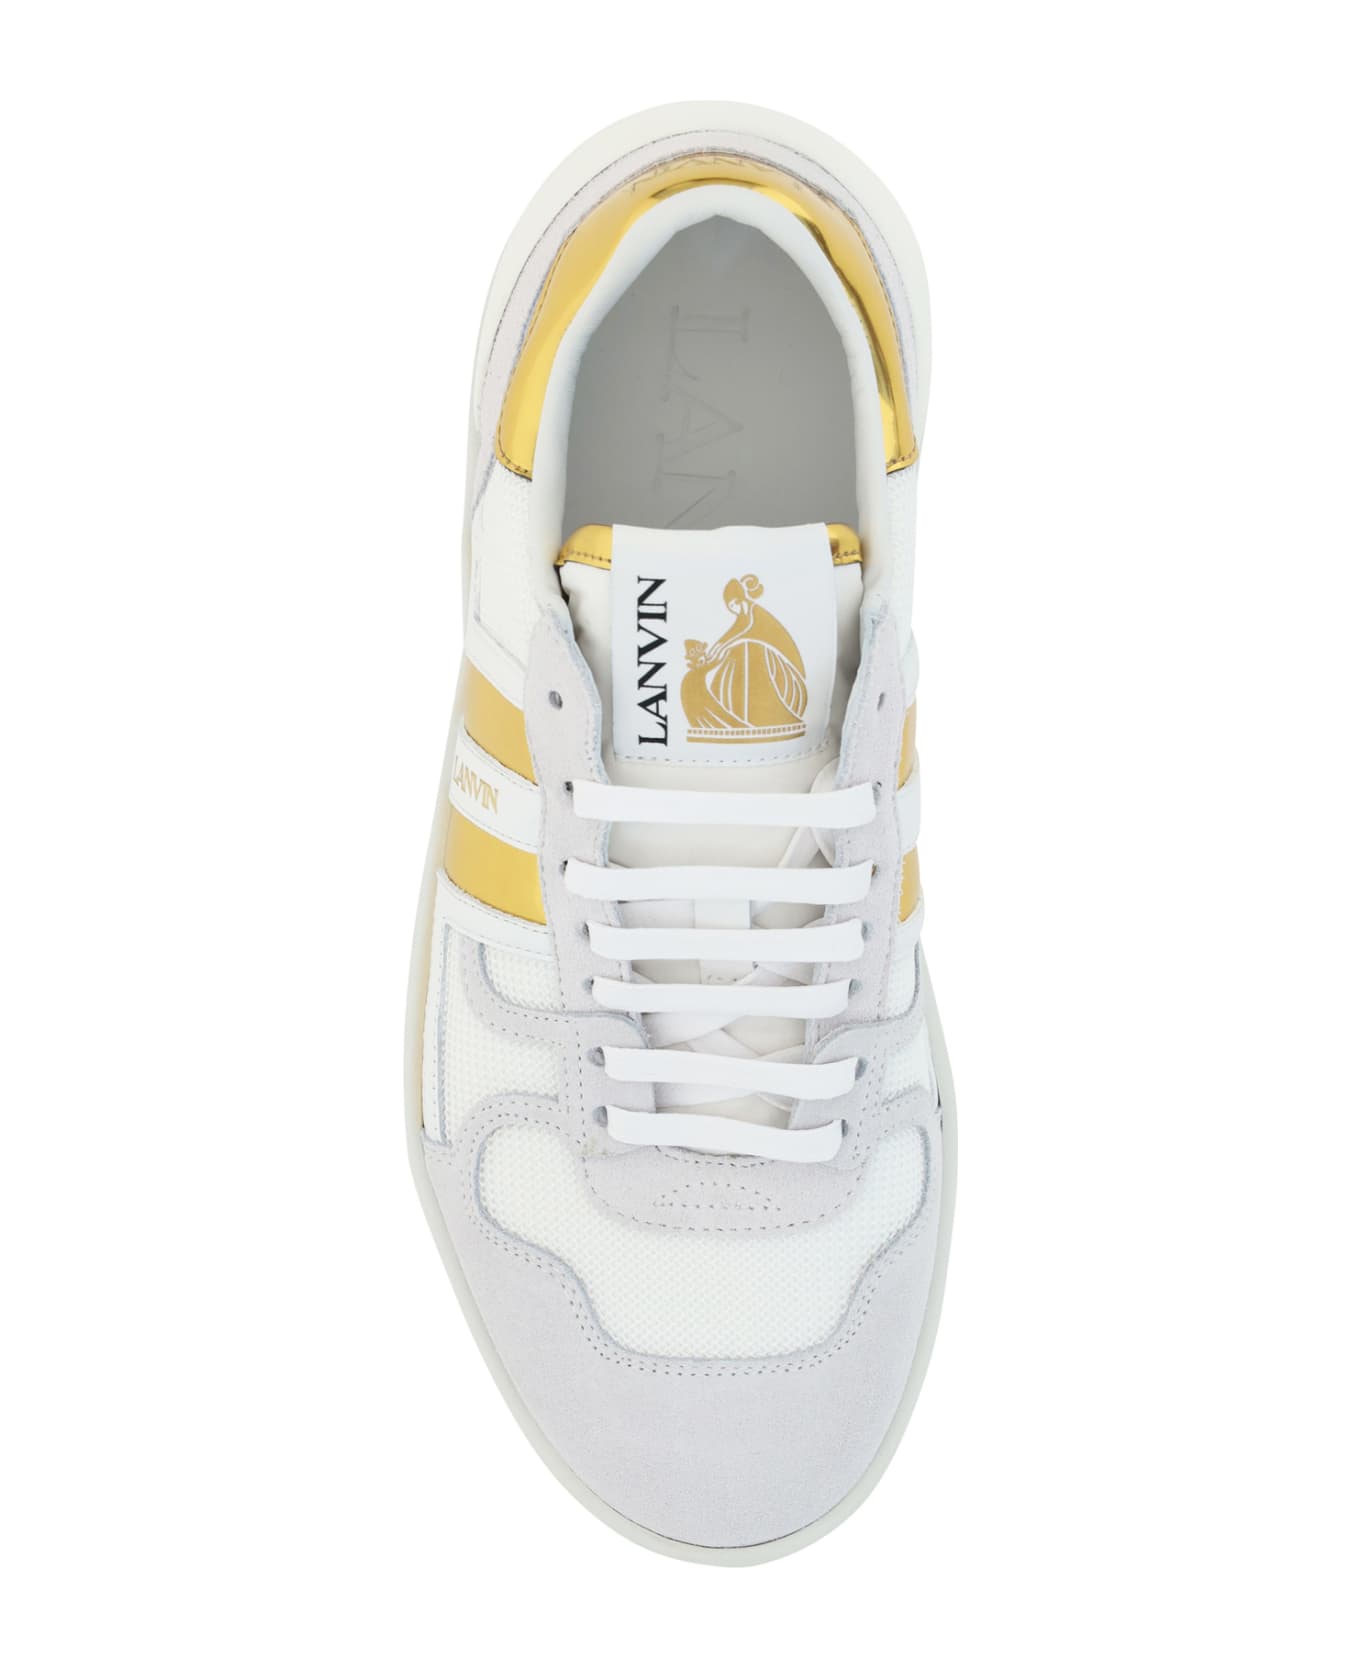 Lanvin Top Sneakers - White/gold